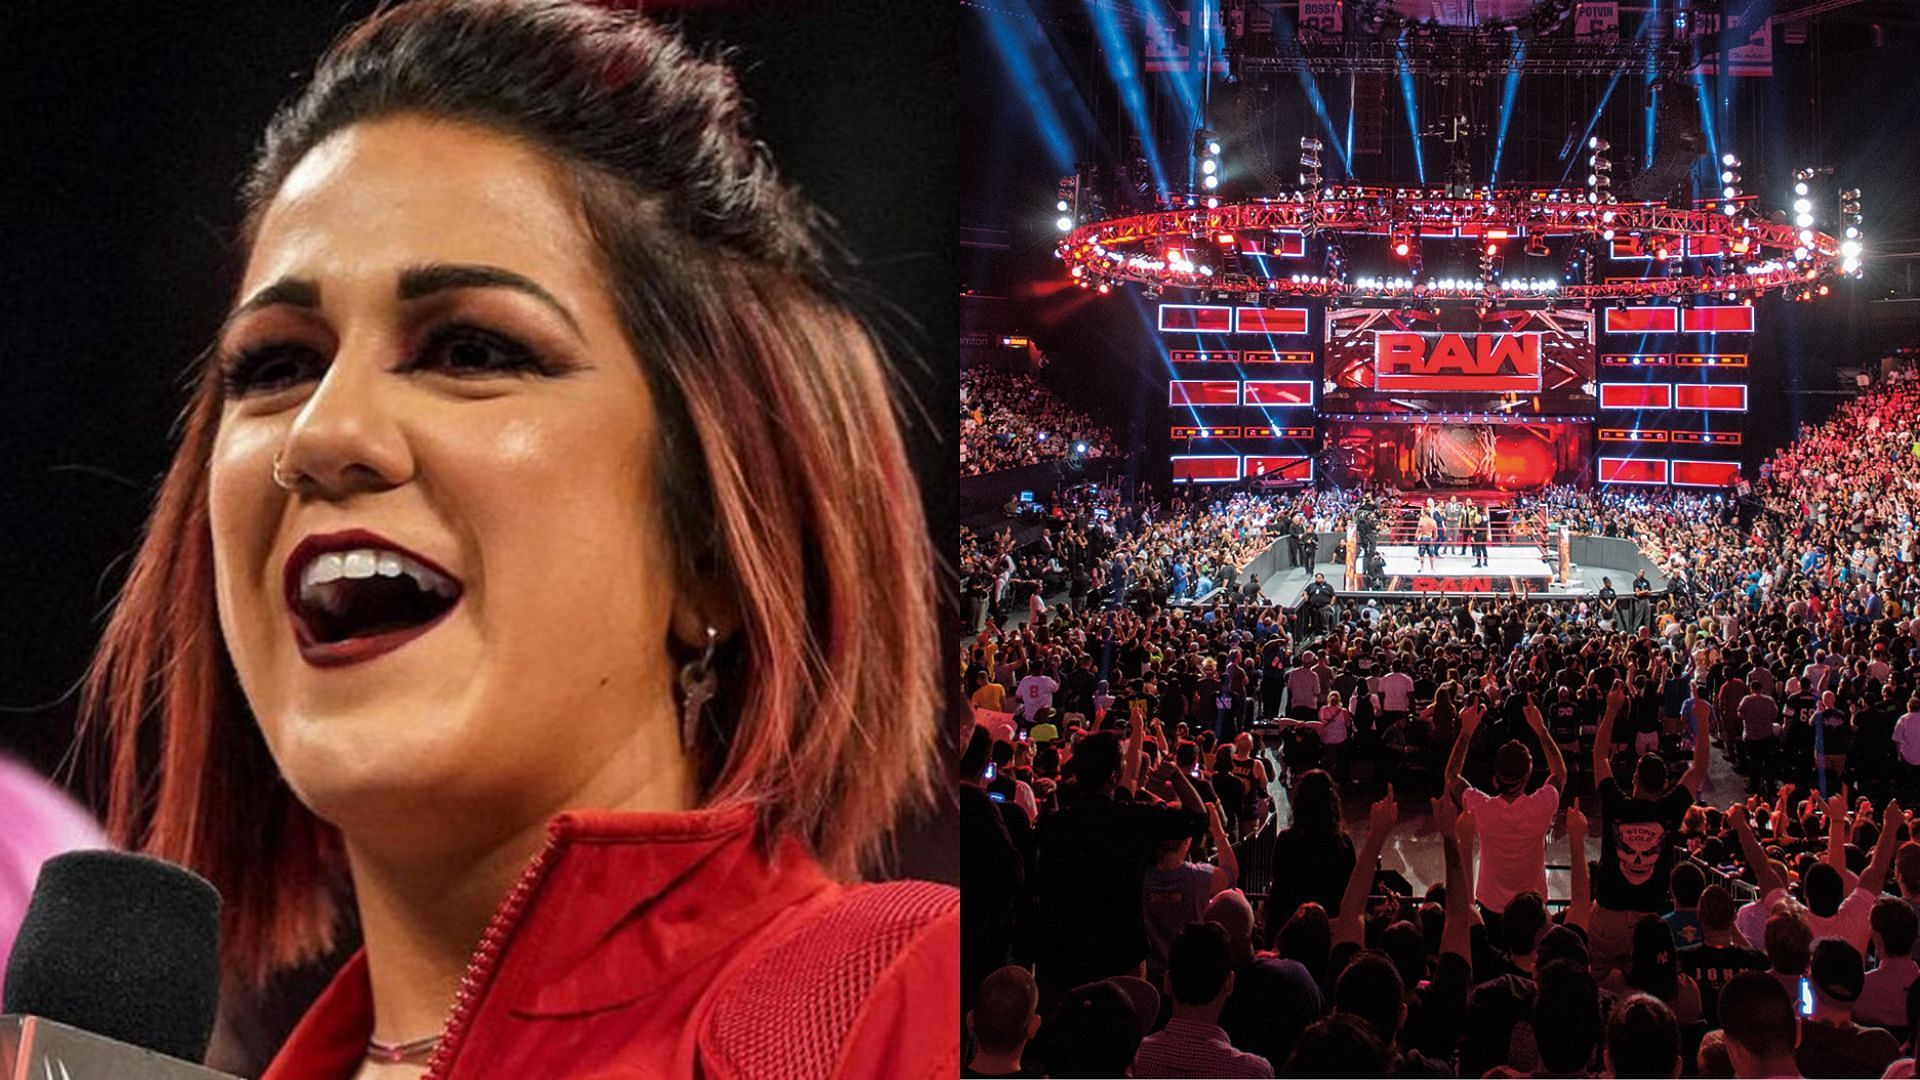 Bayley was drafted to WWE SmackDown.